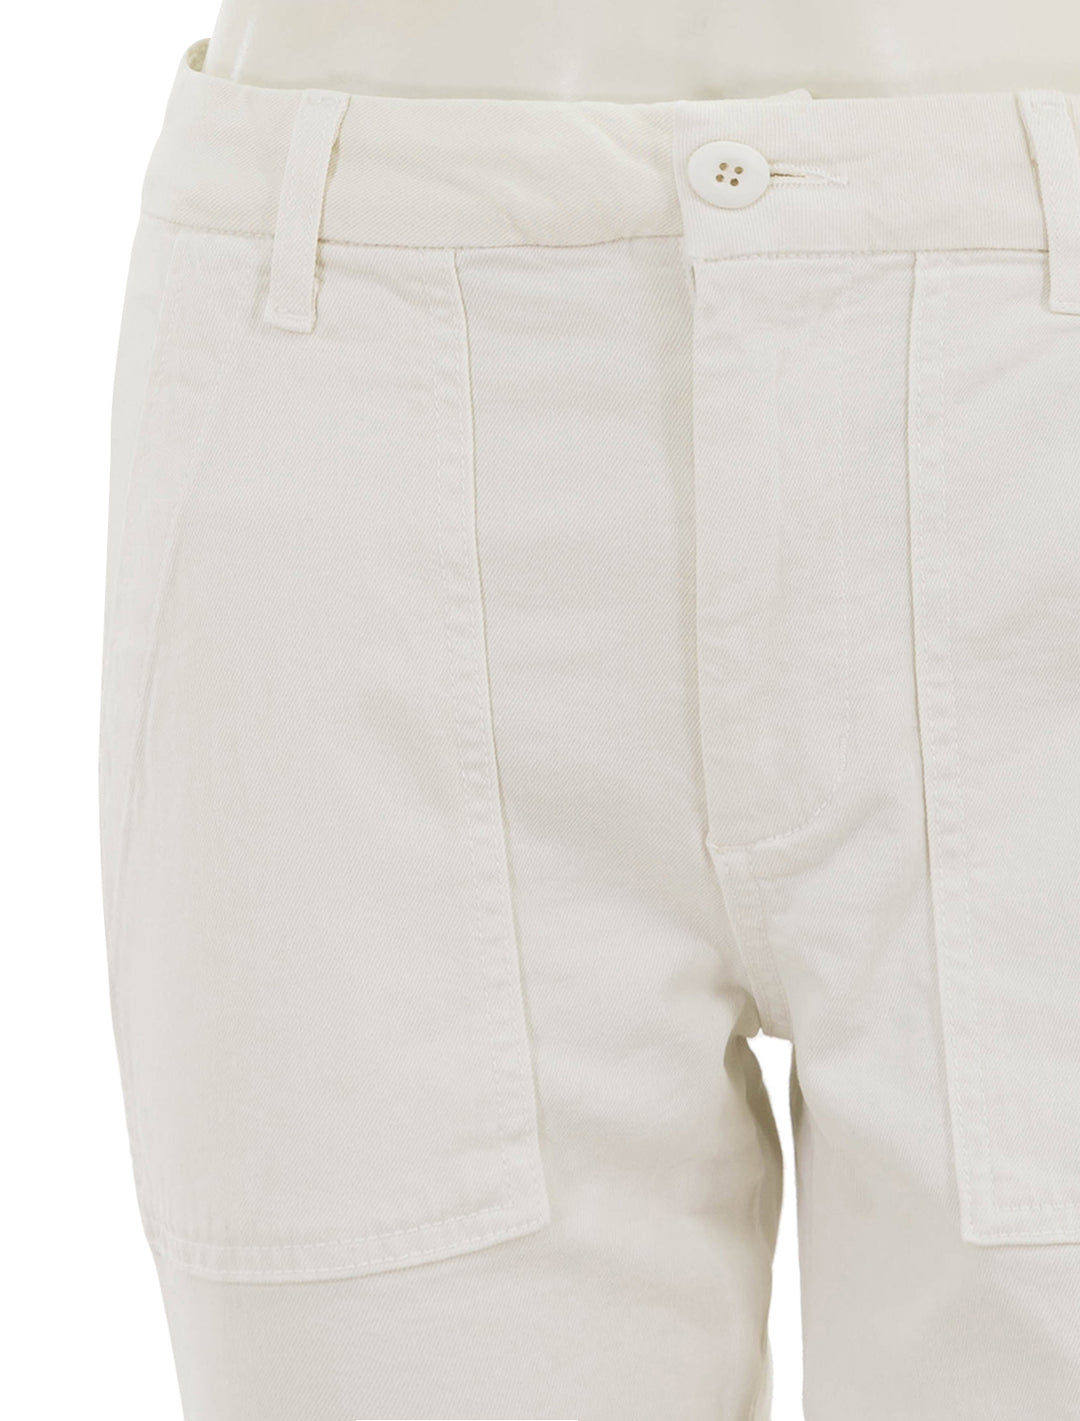 Close-up view of AMO's easy army trouser in white oak.